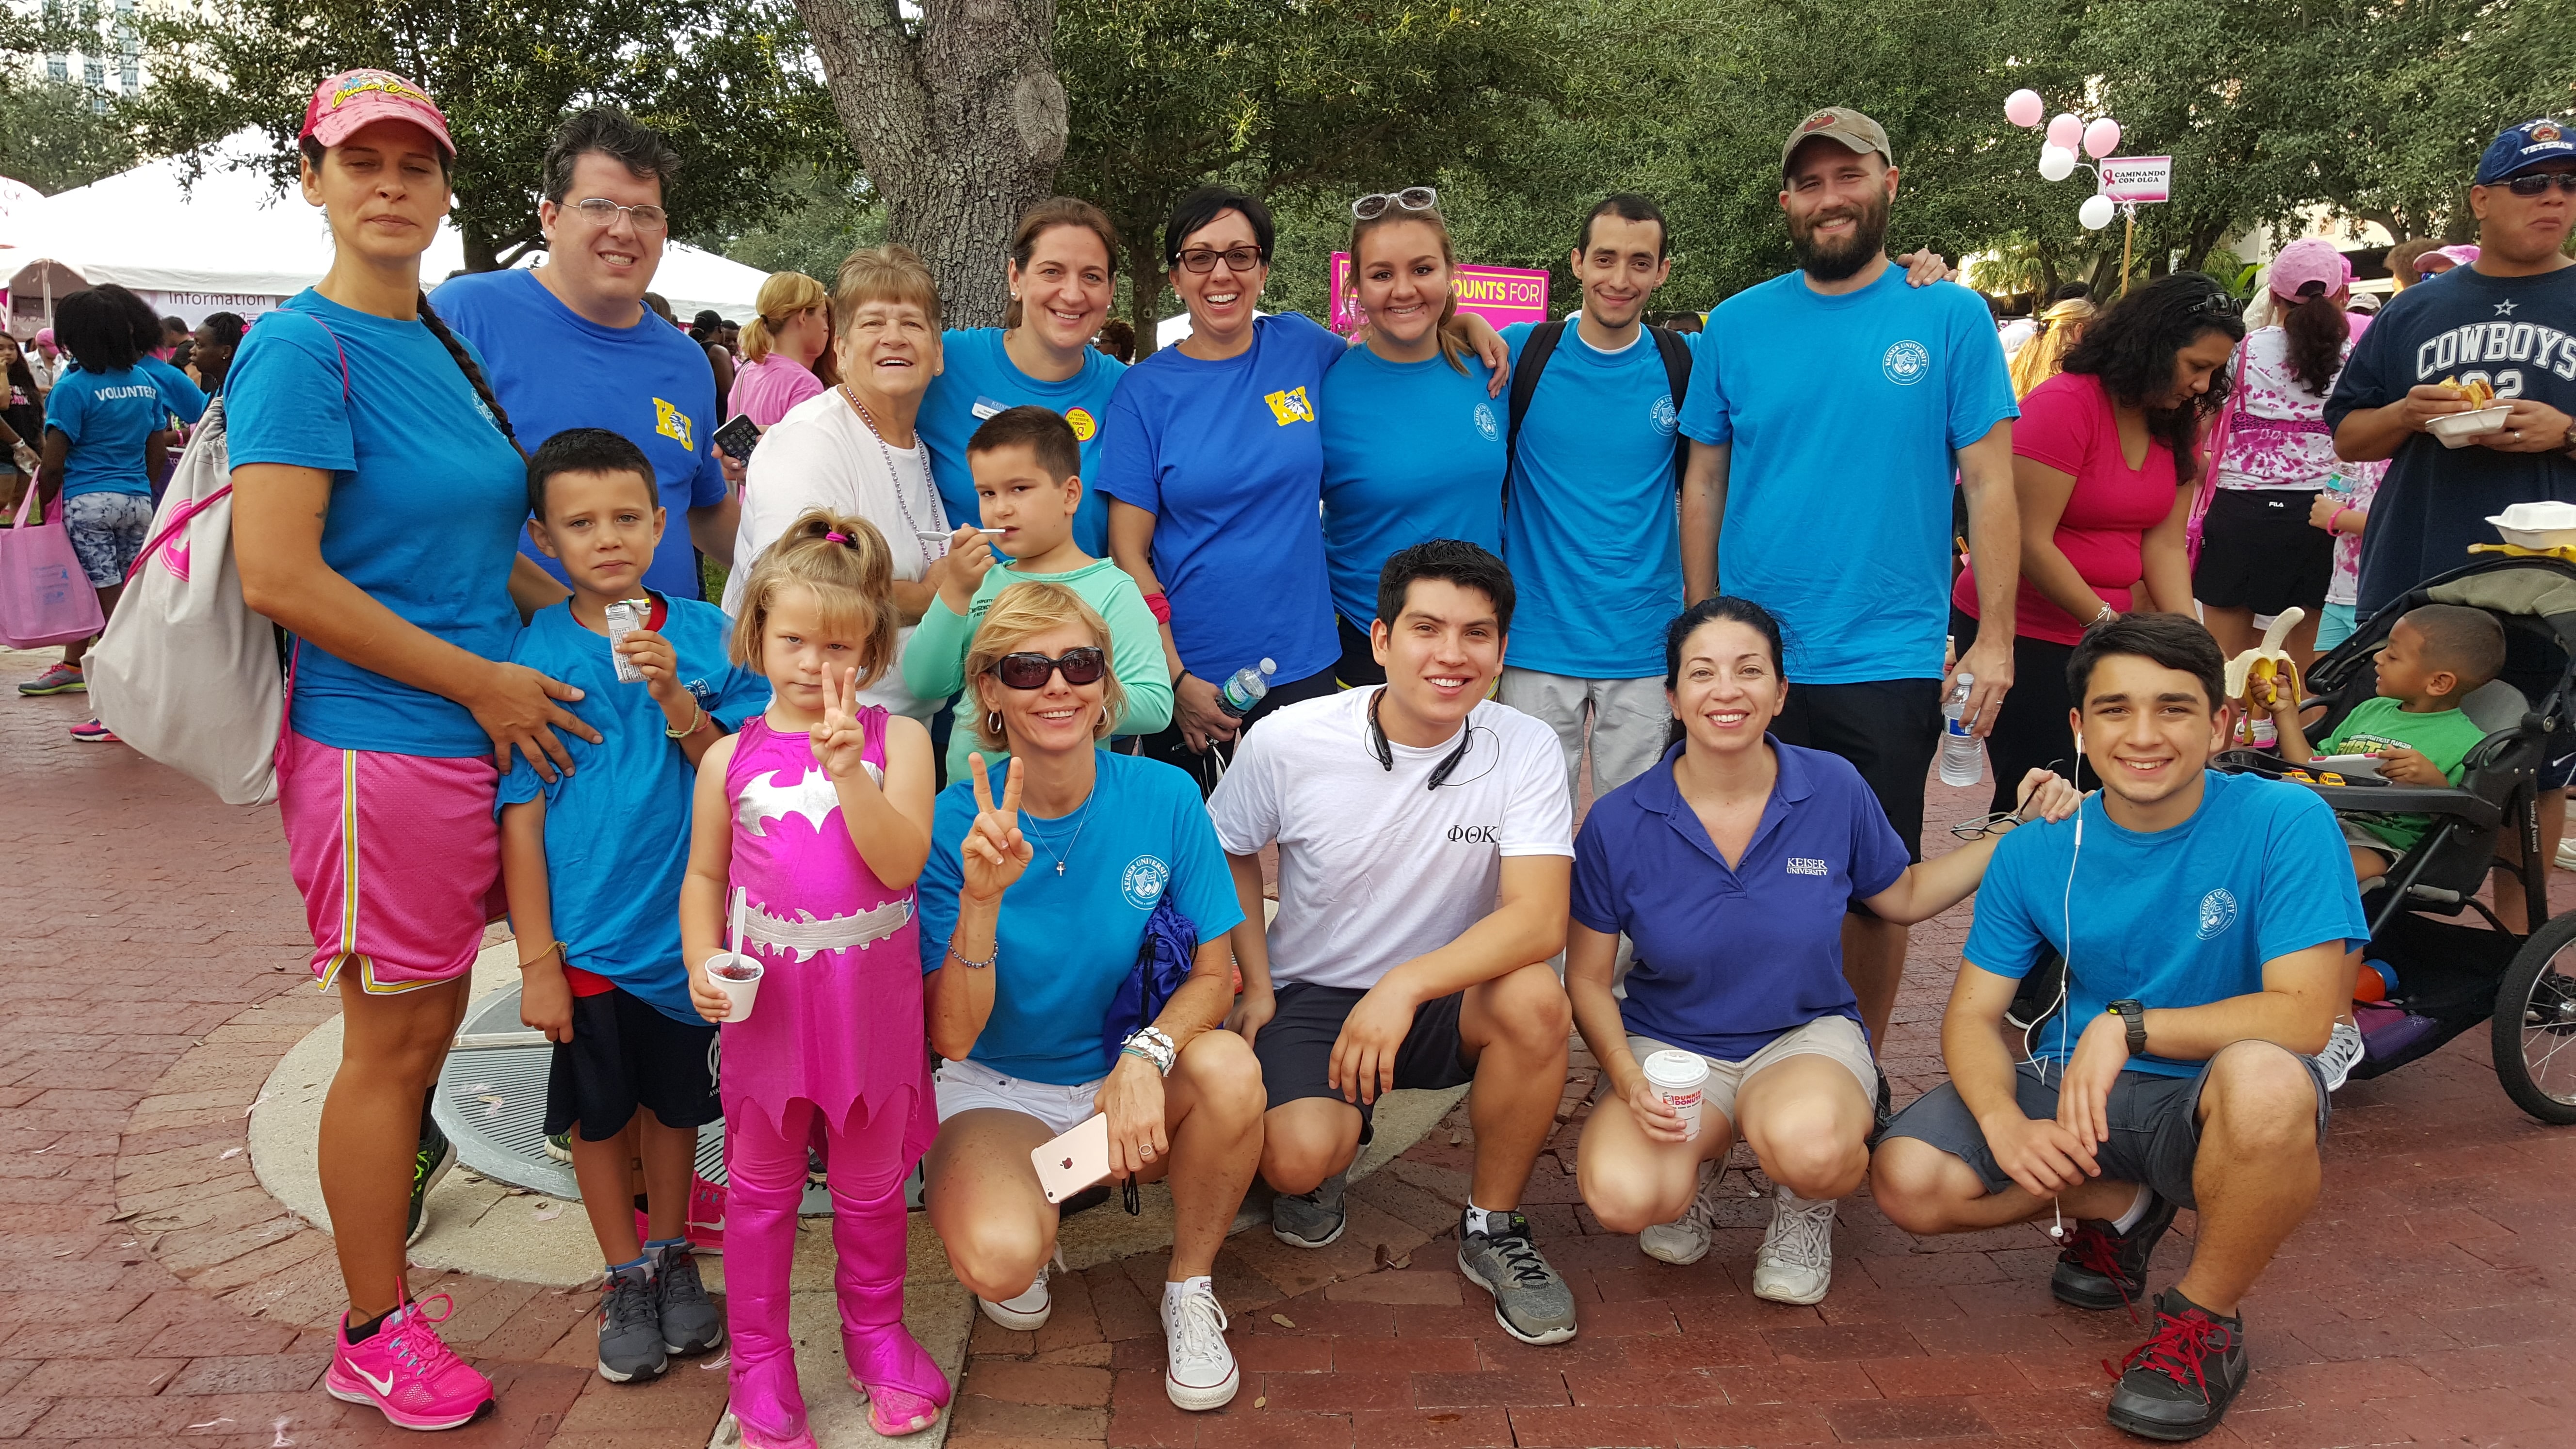 The Ft. Lauderdale Campus Raised Money for the American Cancer Society